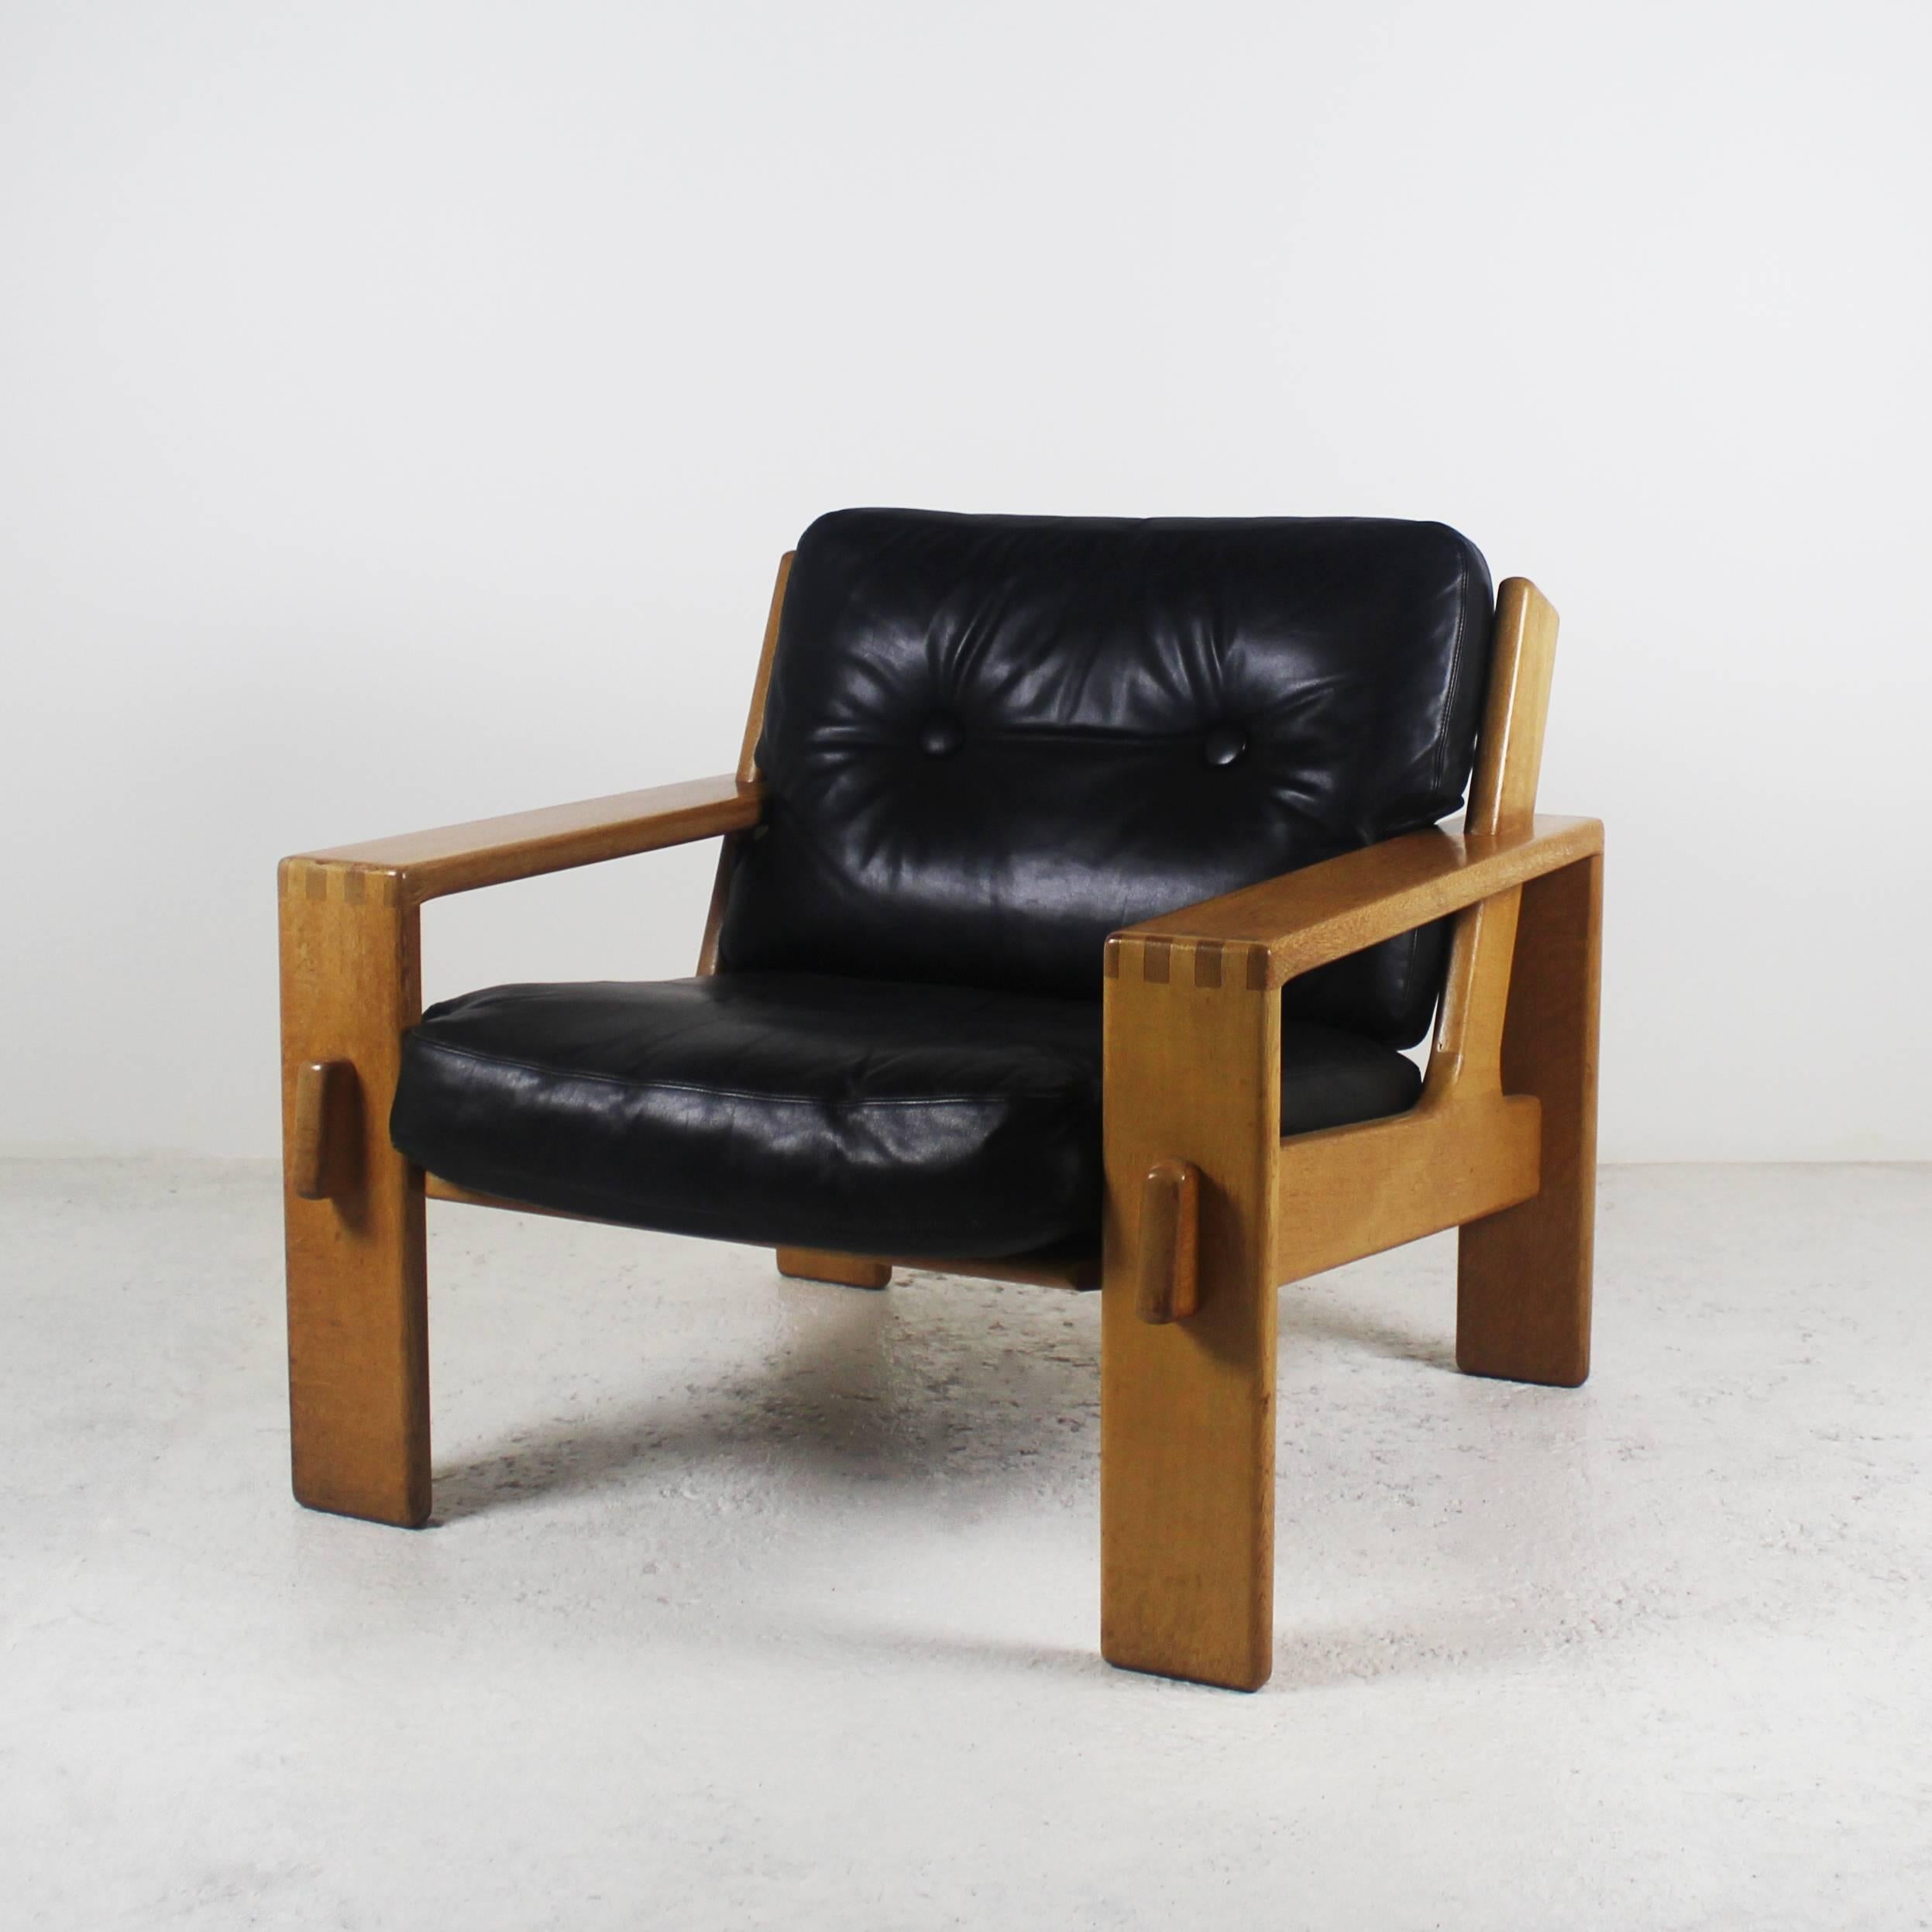 A beautiful example of Danish design with this pair of 1960s armchairs. Frame in oak, cushions in the original black leather in good condition.